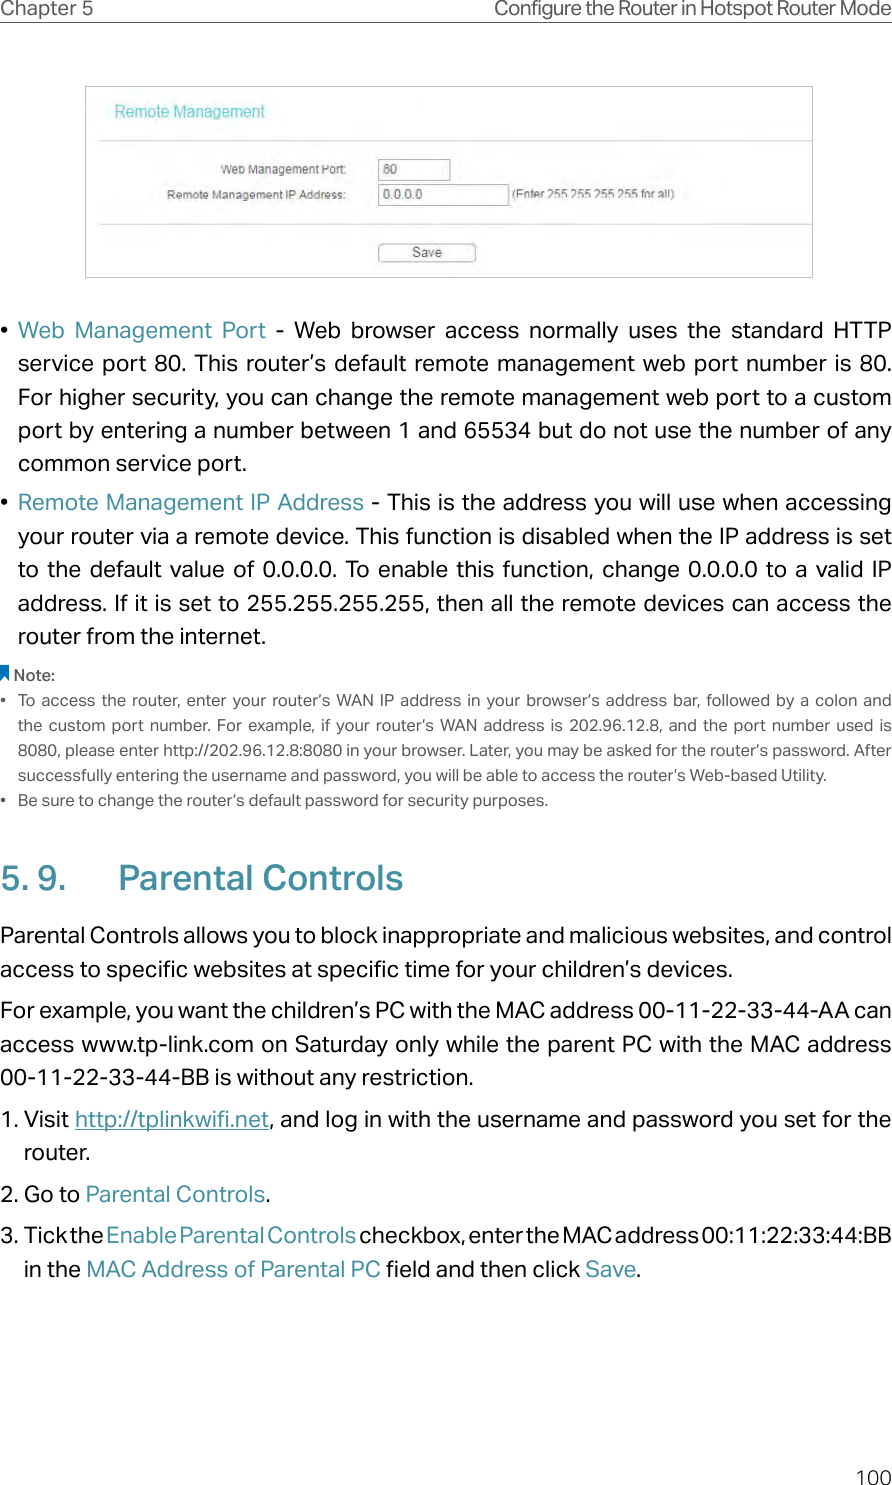 100Chapter 5 Configure the Router in Hotspot Router Mode •  Web Management Port - Web browser access normally uses the standard HTTP service port 80. This router’s default remote management web port number is 80. For higher security, you can change the remote management web port to a custom port by entering a number between 1 and 65534 but do not use the number of any common service port. •  Remote Management IP Address - This is the address you will use when accessing your router via a remote device. This function is disabled when the IP address is set to the default value of 0.0.0.0. To enable this function, change 0.0.0.0 to a valid IP address. If it is set to 255.255.255.255, then all the remote devices can access the router from the internet. Note:•  To access the router, enter your router’s WAN IP address in your browser’s address bar, followed by a colon and the custom port number. For example, if your router’s WAN address is 202.96.12.8, and the port number used is 8080, please enter http://202.96.12.8:8080 in your browser. Later, you may be asked for the router’s password. After successfully entering the username and password, you will be able to access the router’s Web-based Utility.•  Be sure to change the router’s default password for security purposes.5. 9.  Parental ControlsParental Controls allows you to block inappropriate and malicious websites, and control access to specific websites at specific time for your children’s devices.For example, you want the children’s PC with the MAC address 00-11-22-33-44-AA can access www.tp-link.com on Saturday only while the parent PC with the MAC address 00-11-22-33-44-BB is without any restriction.1. Visit http://tplinkwifi.net, and log in with the username and password you set for the router.2. Go to Parental Controls.3. Tick the Enable Parental Controls checkbox, enter the MAC address 00:11:22:33:44:BB in the MAC Address of Parental PC field and then click Save.